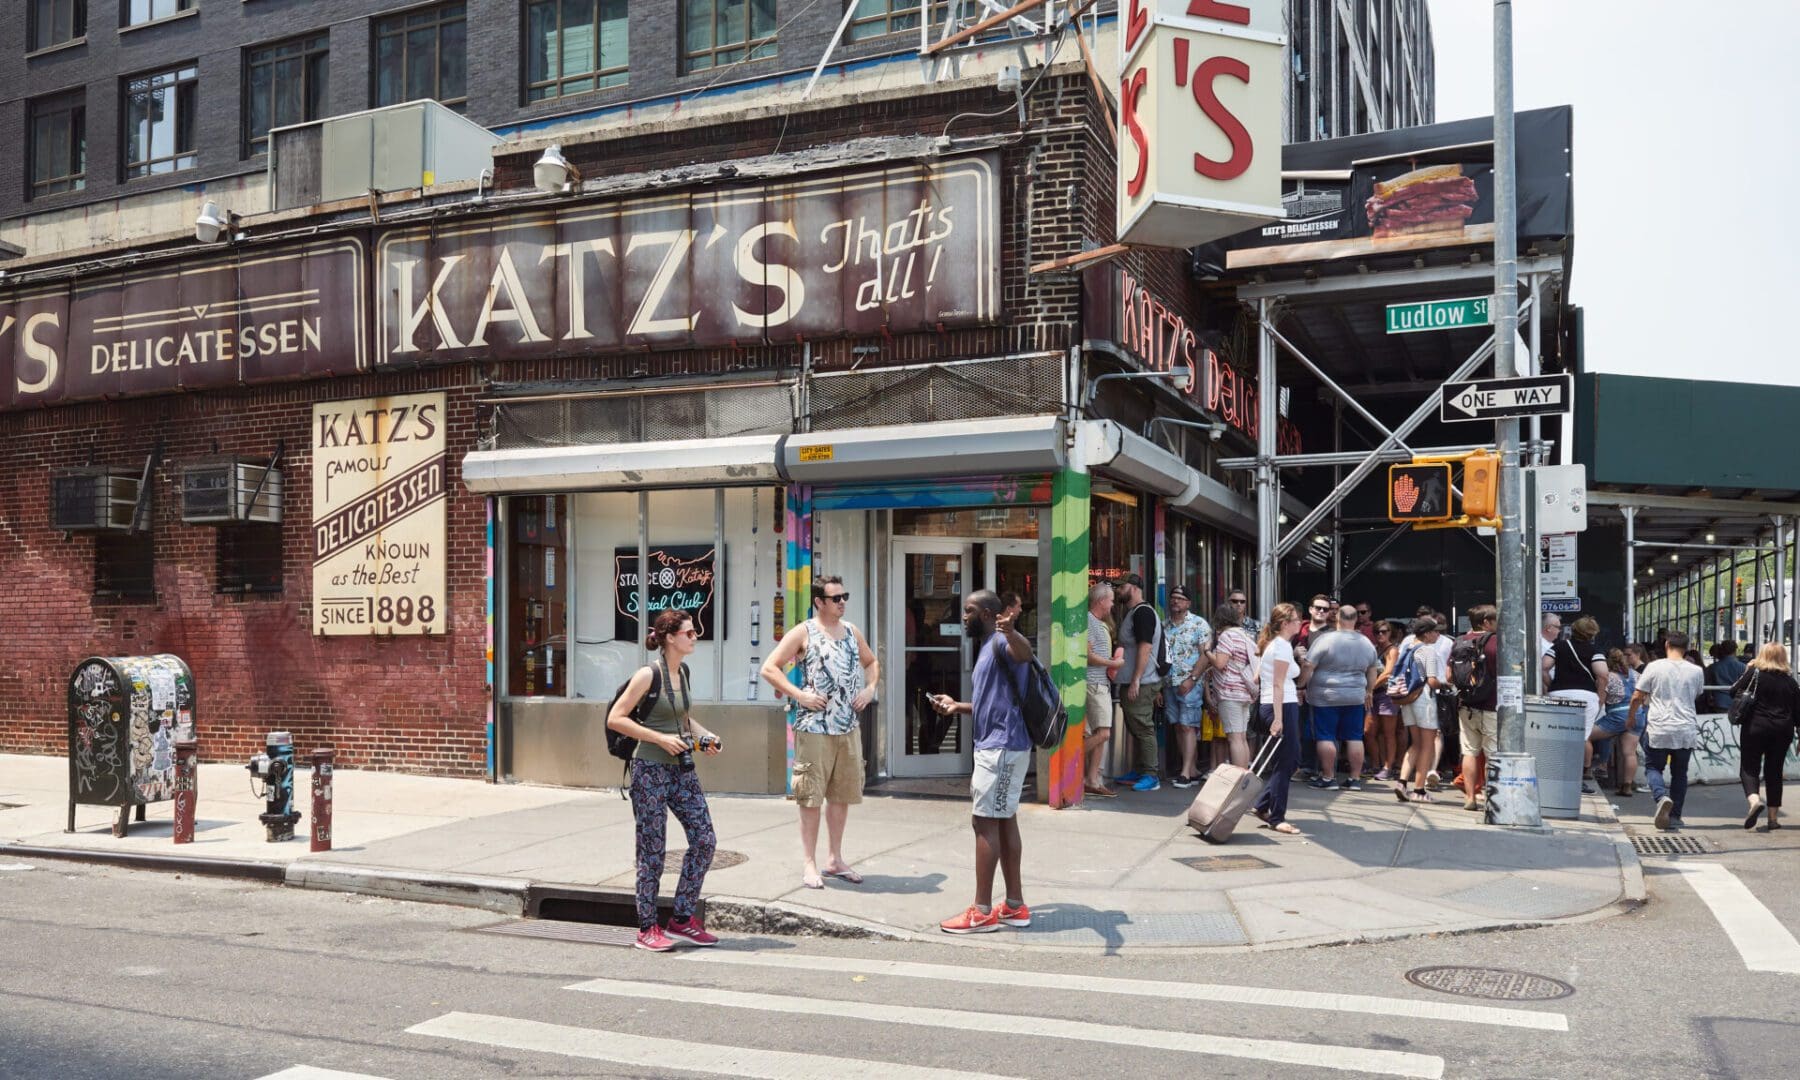 People waiting outside katz's delicatessen on a sunny day at the corner of houston and ludlow streets, nyc.